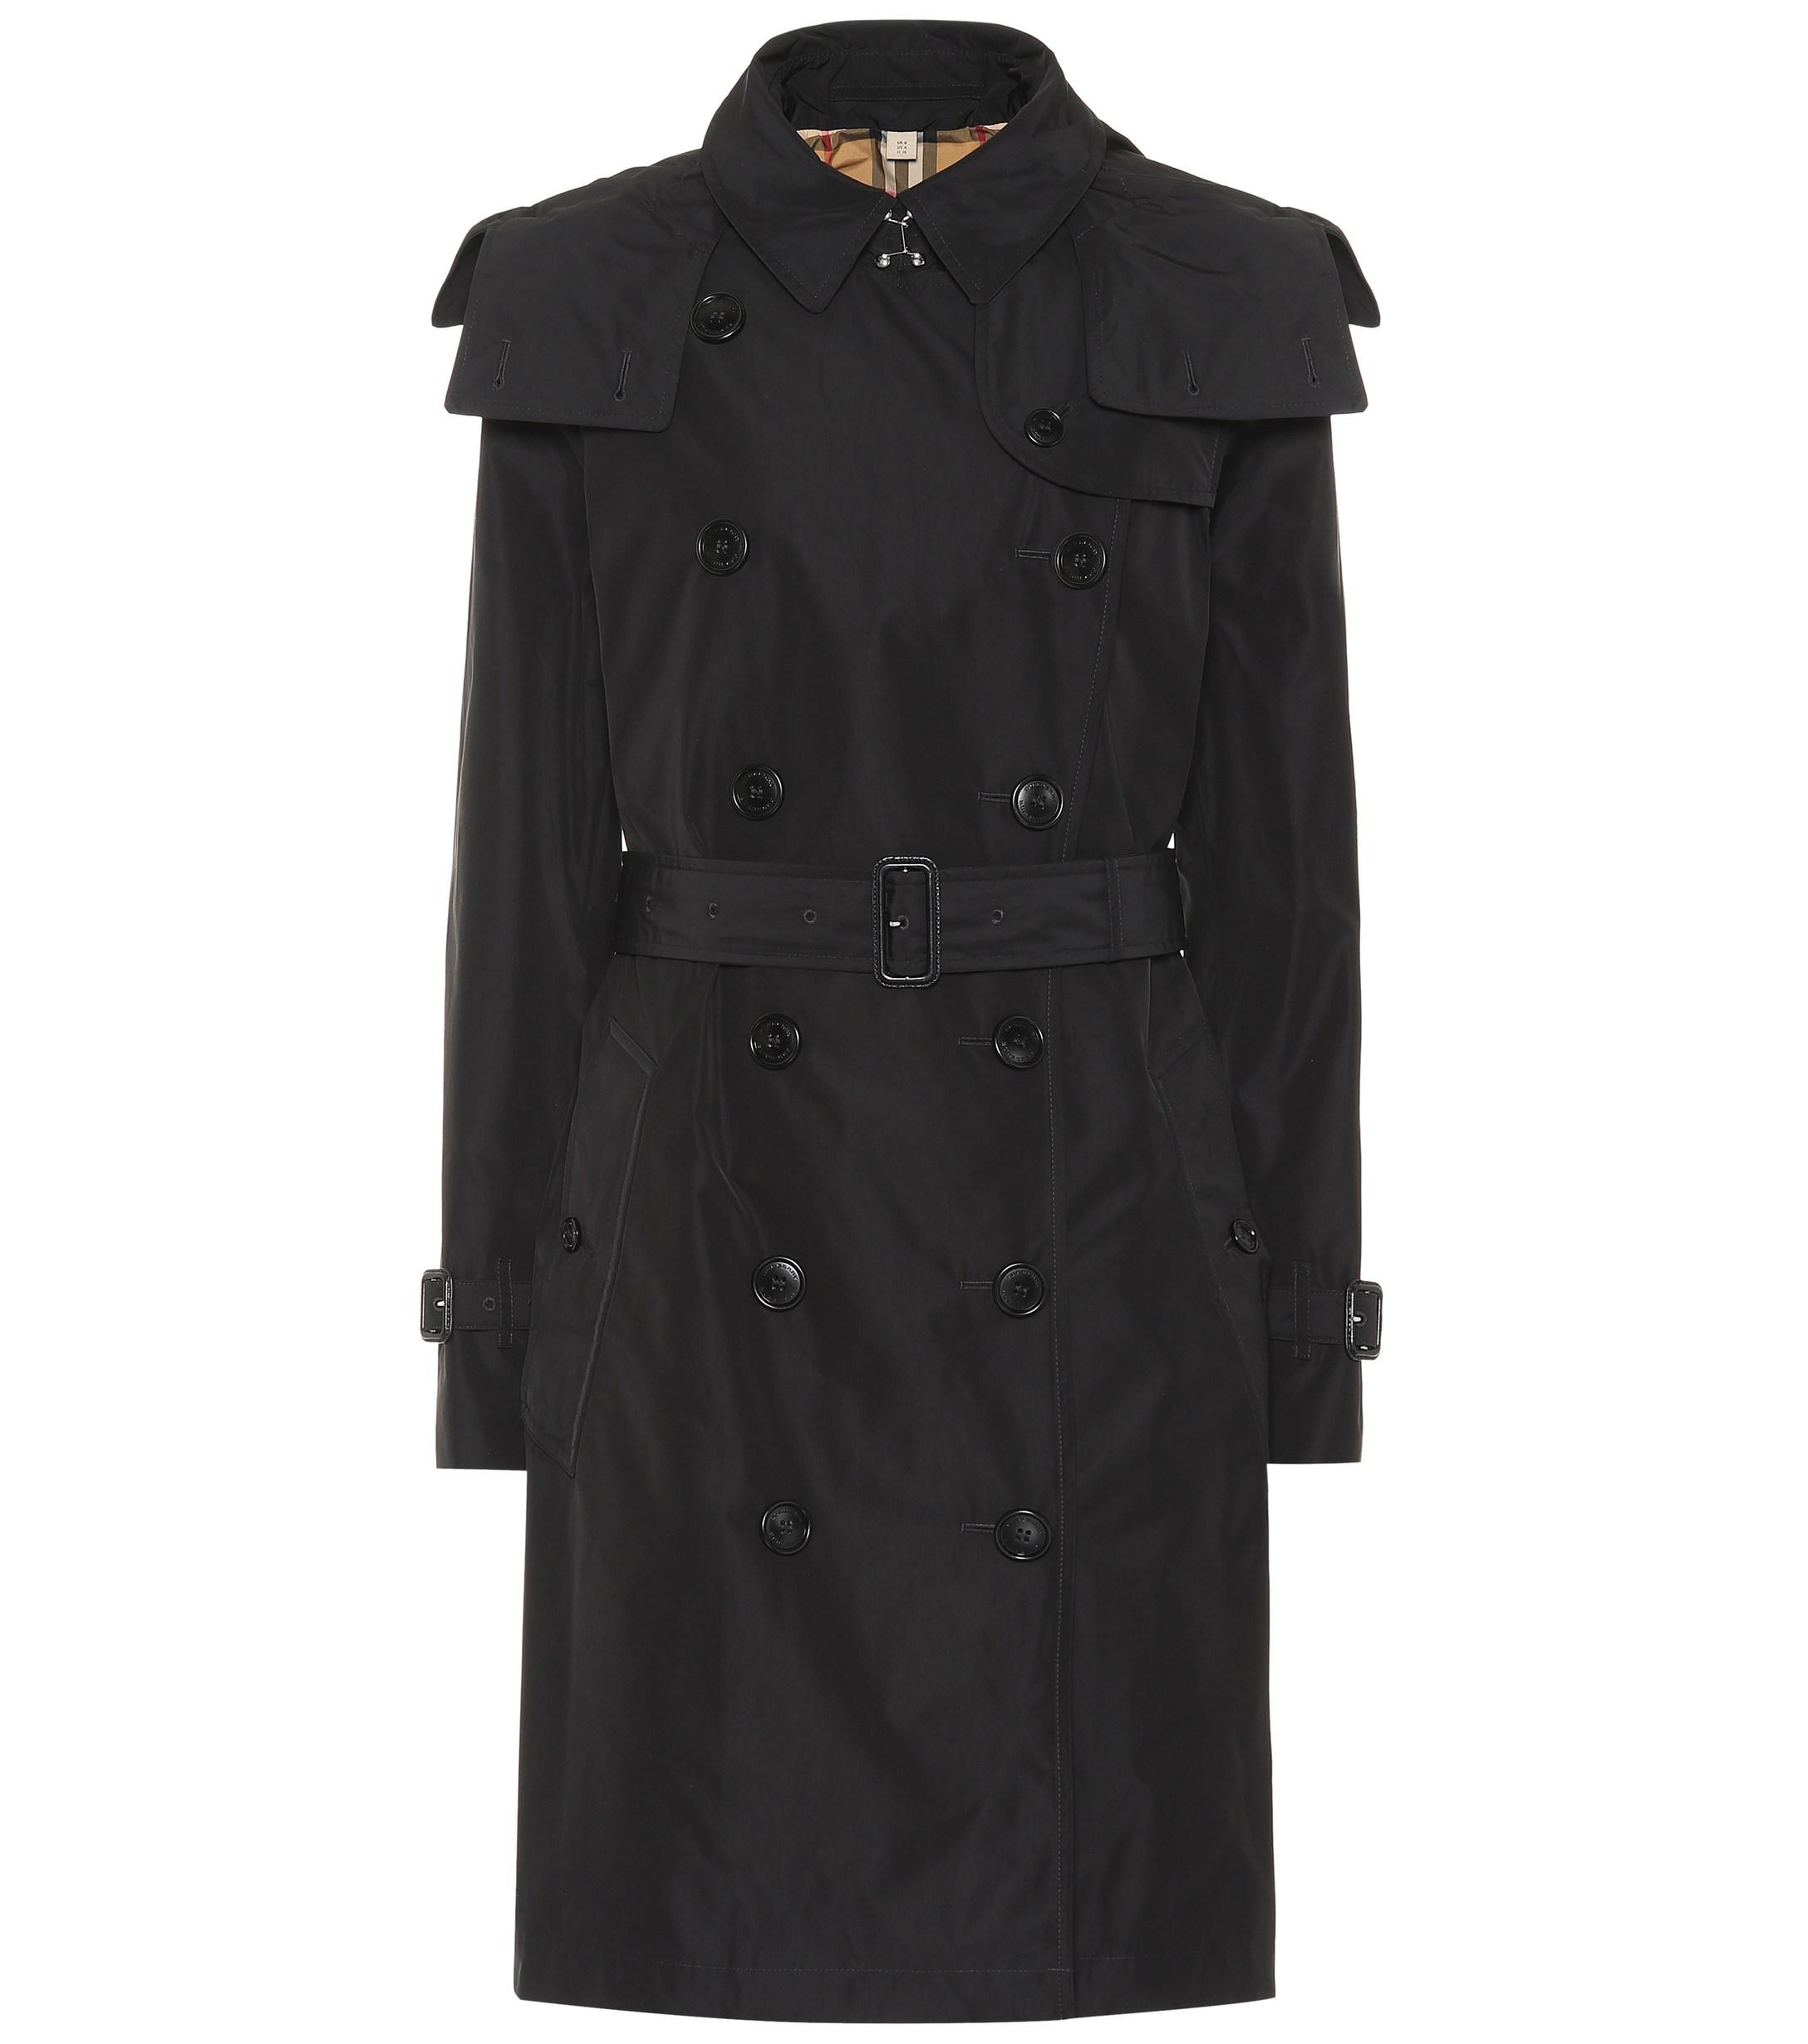 Burberry Hooded Trench Coat in Black - Lyst